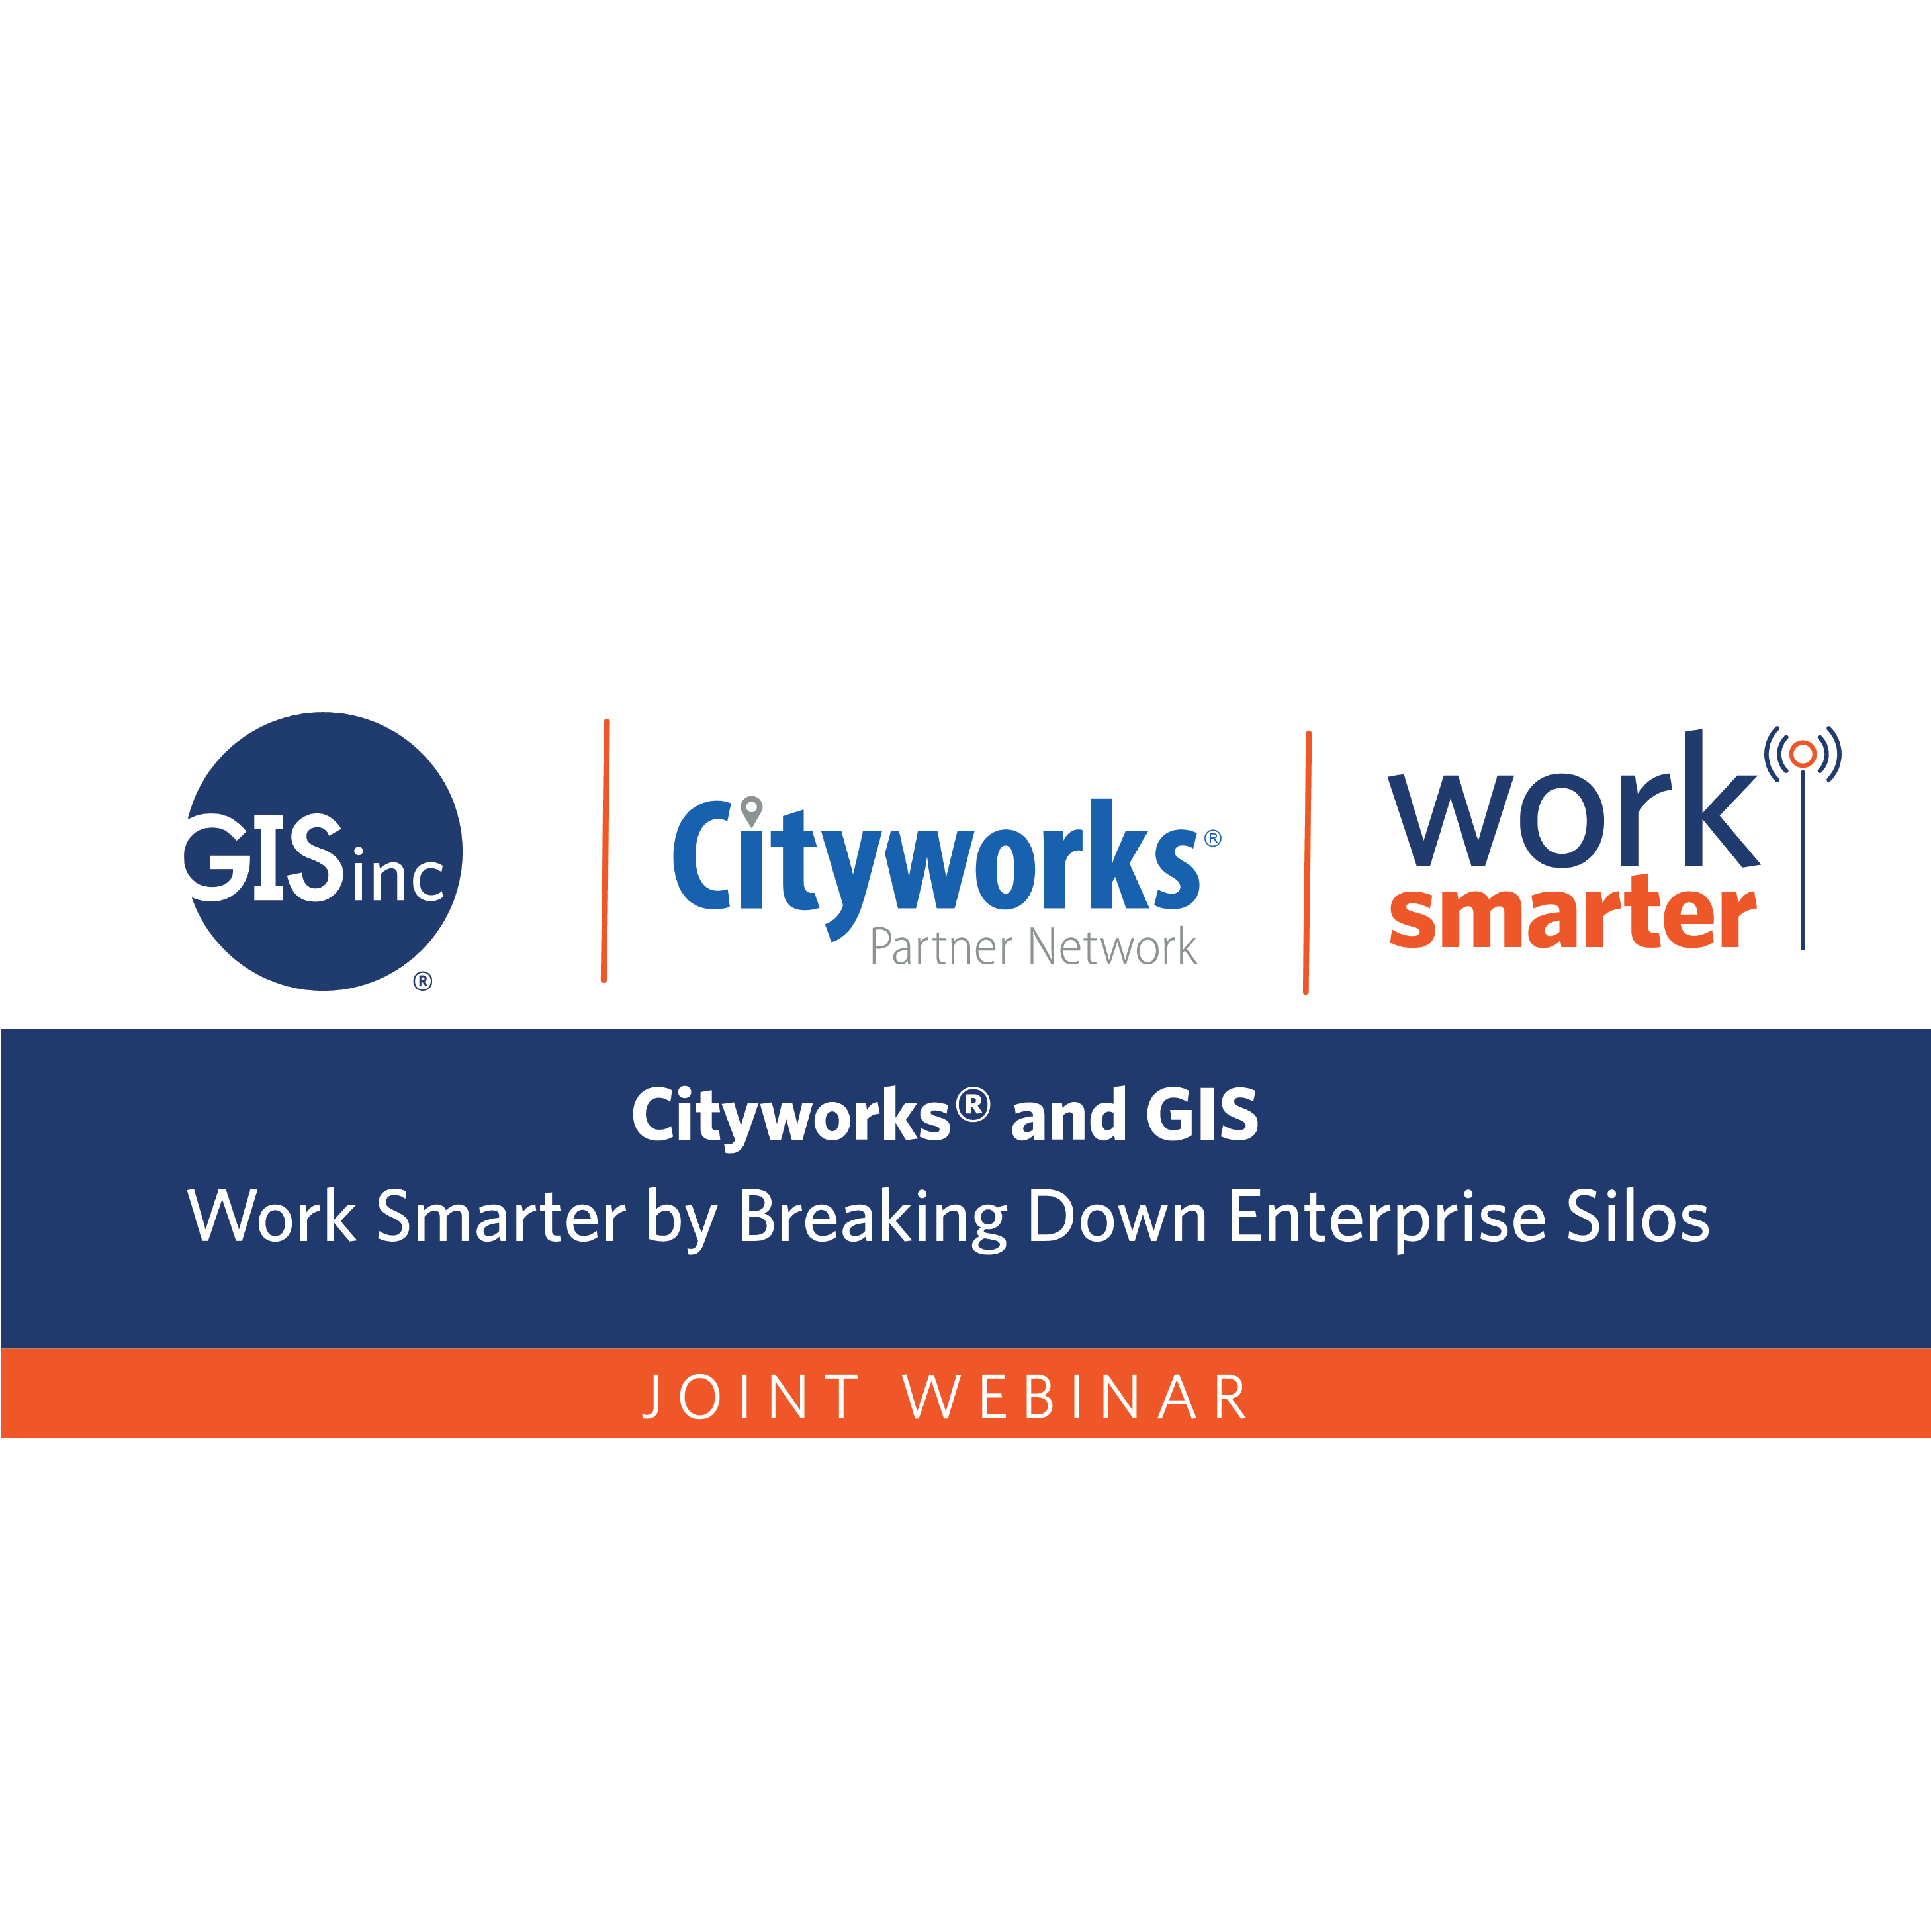 Cityworks® and GIS - Work Smarter by Breaking Down Enterprise Silos image